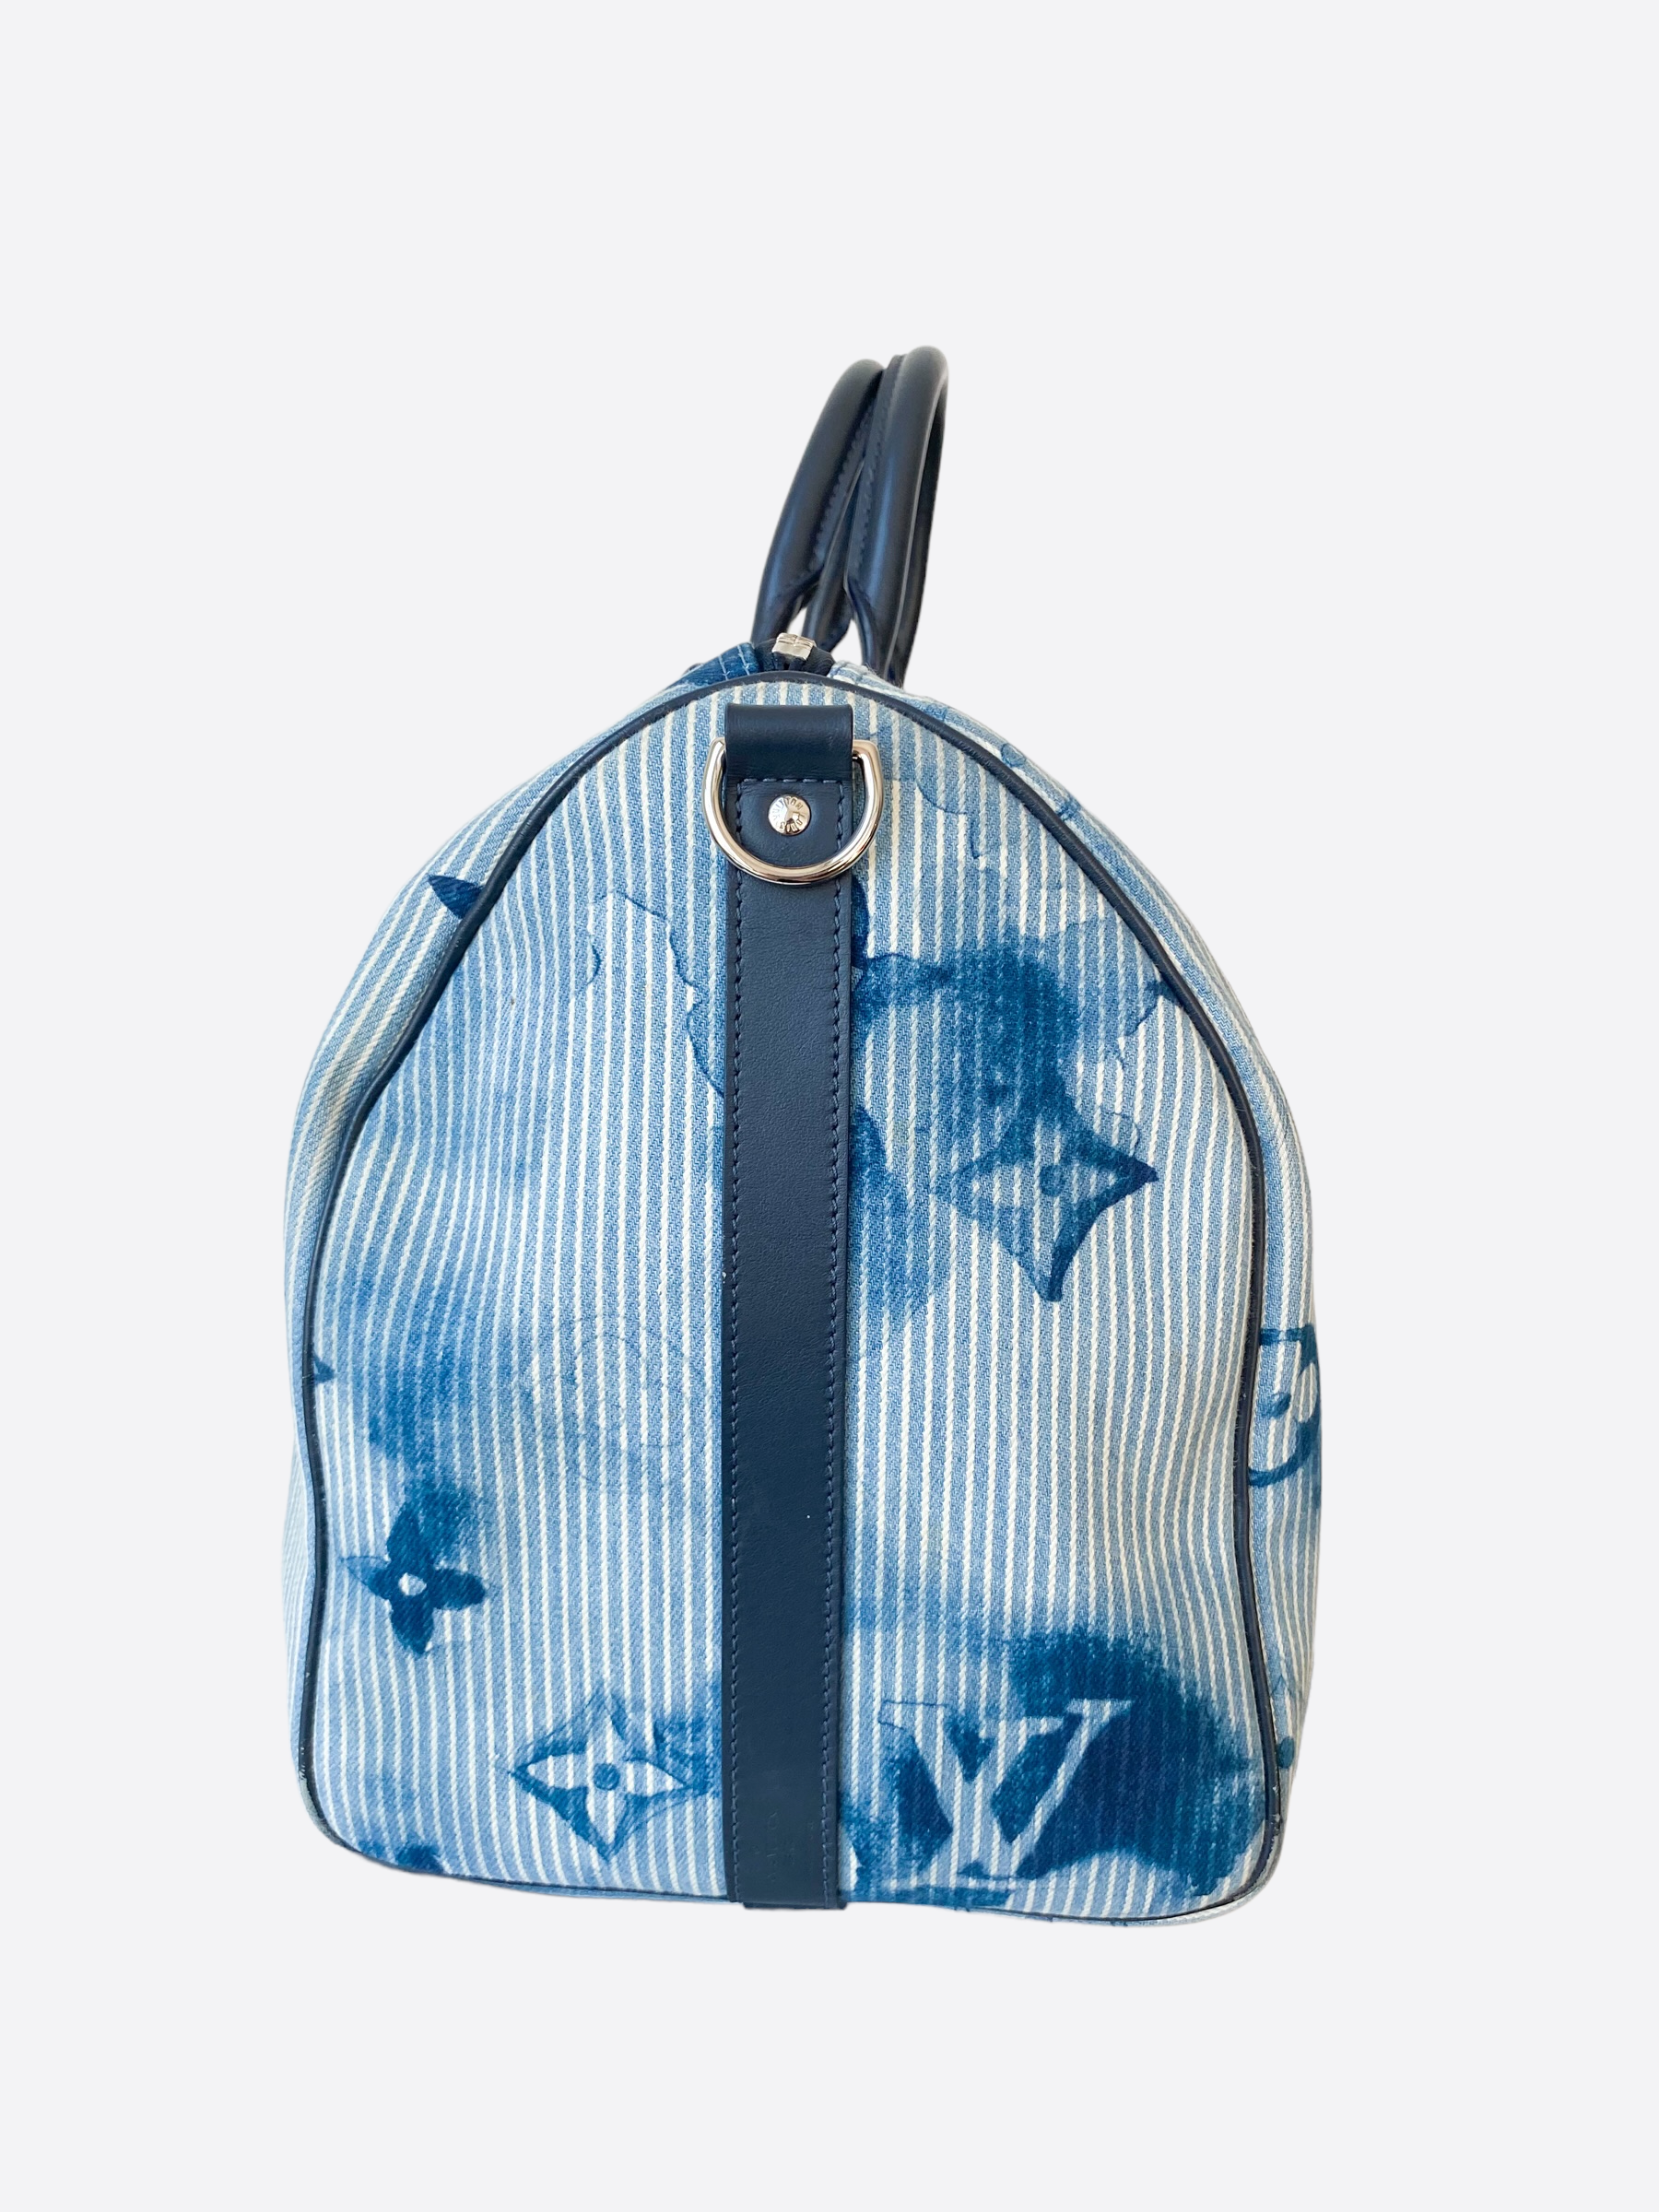 Vuitton BN Watercolor Keepall 50 - Vintage Lux